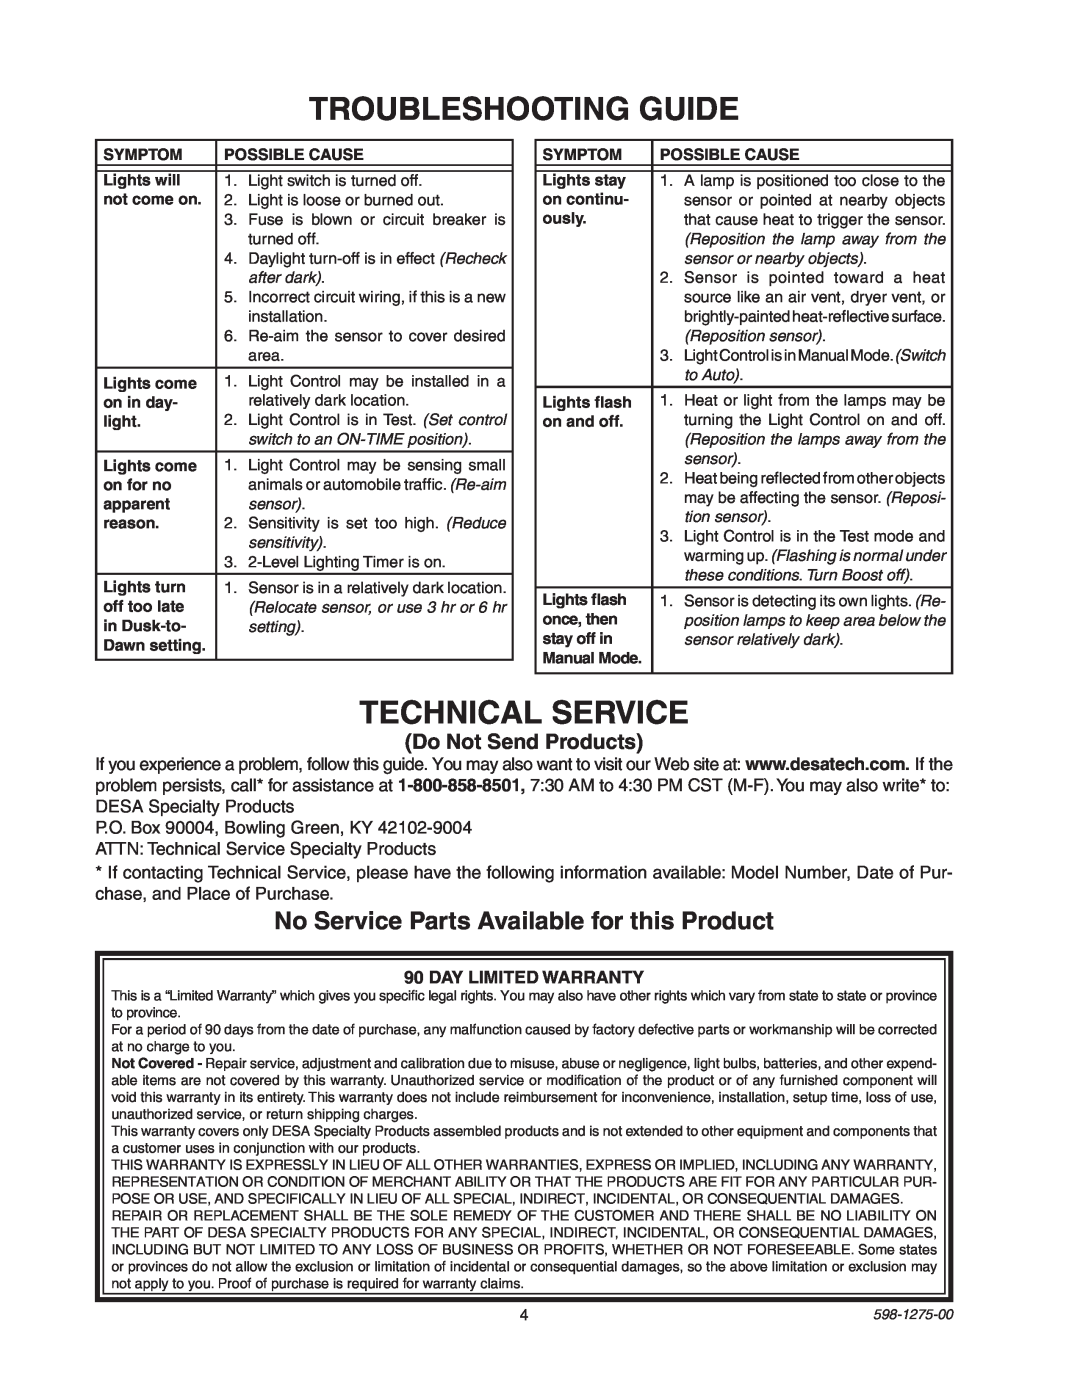 Desa 5512 Troubleshooting Guide, Technical Service, No Service Parts Available for this Product, Do Not Send Products 